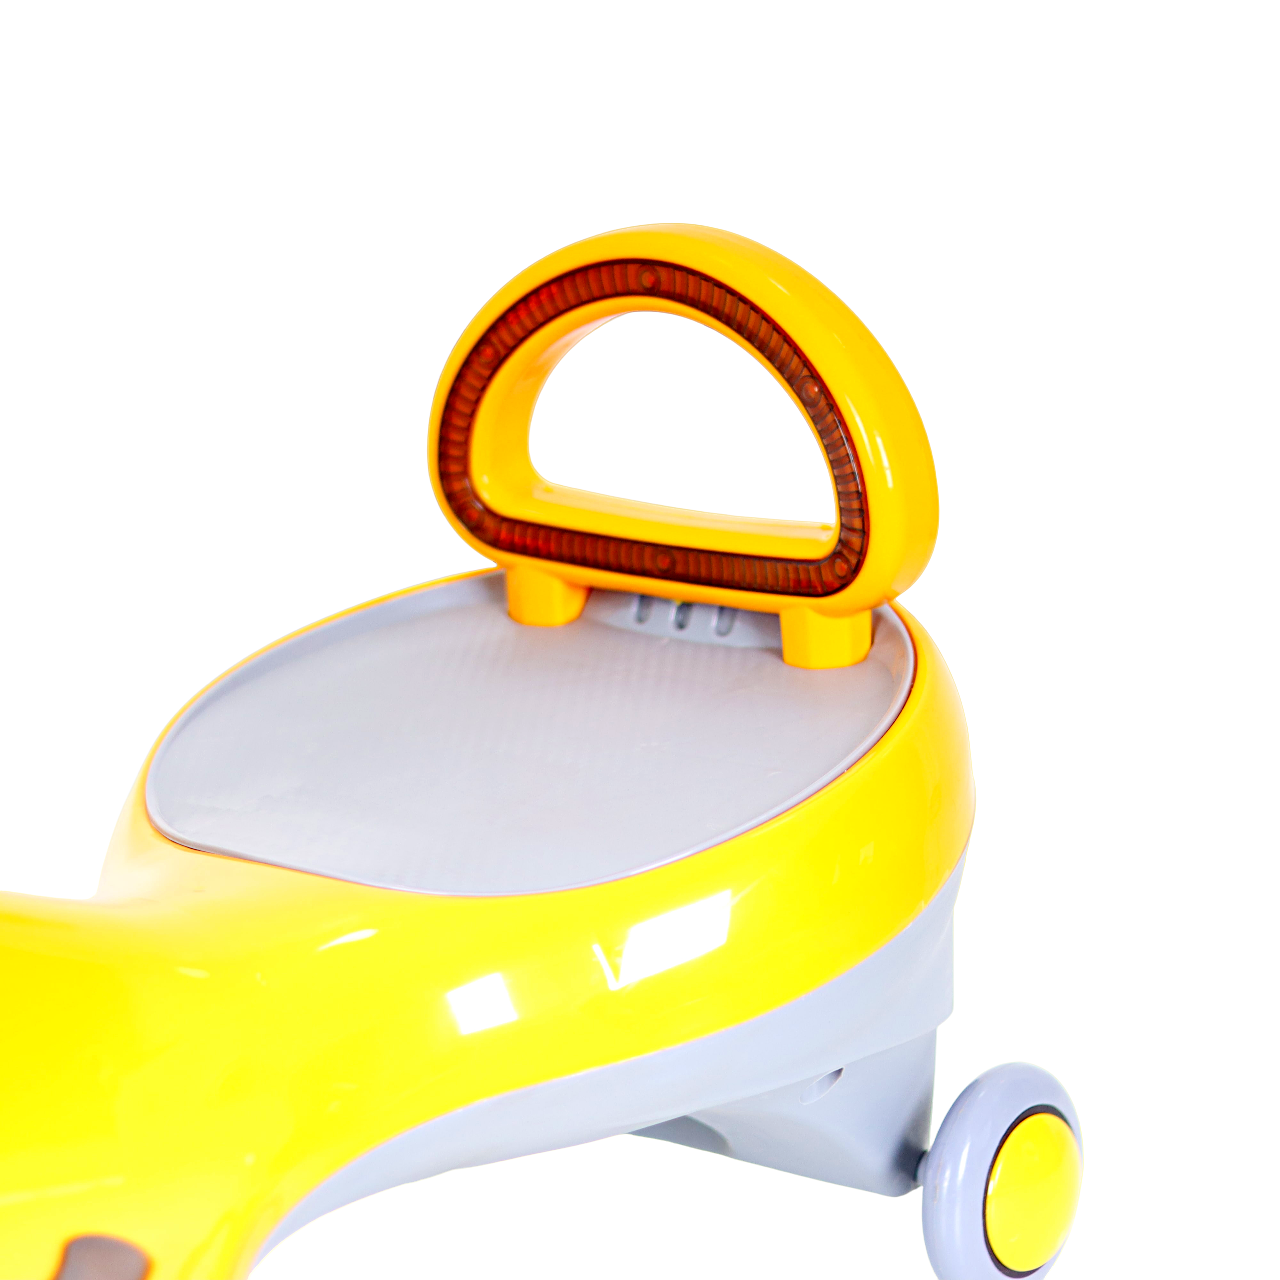 Luusa Twister Backlight Magic car : The Ultimate Ride-On Toy for Kids Aged 2-8 Years with Music and Lights